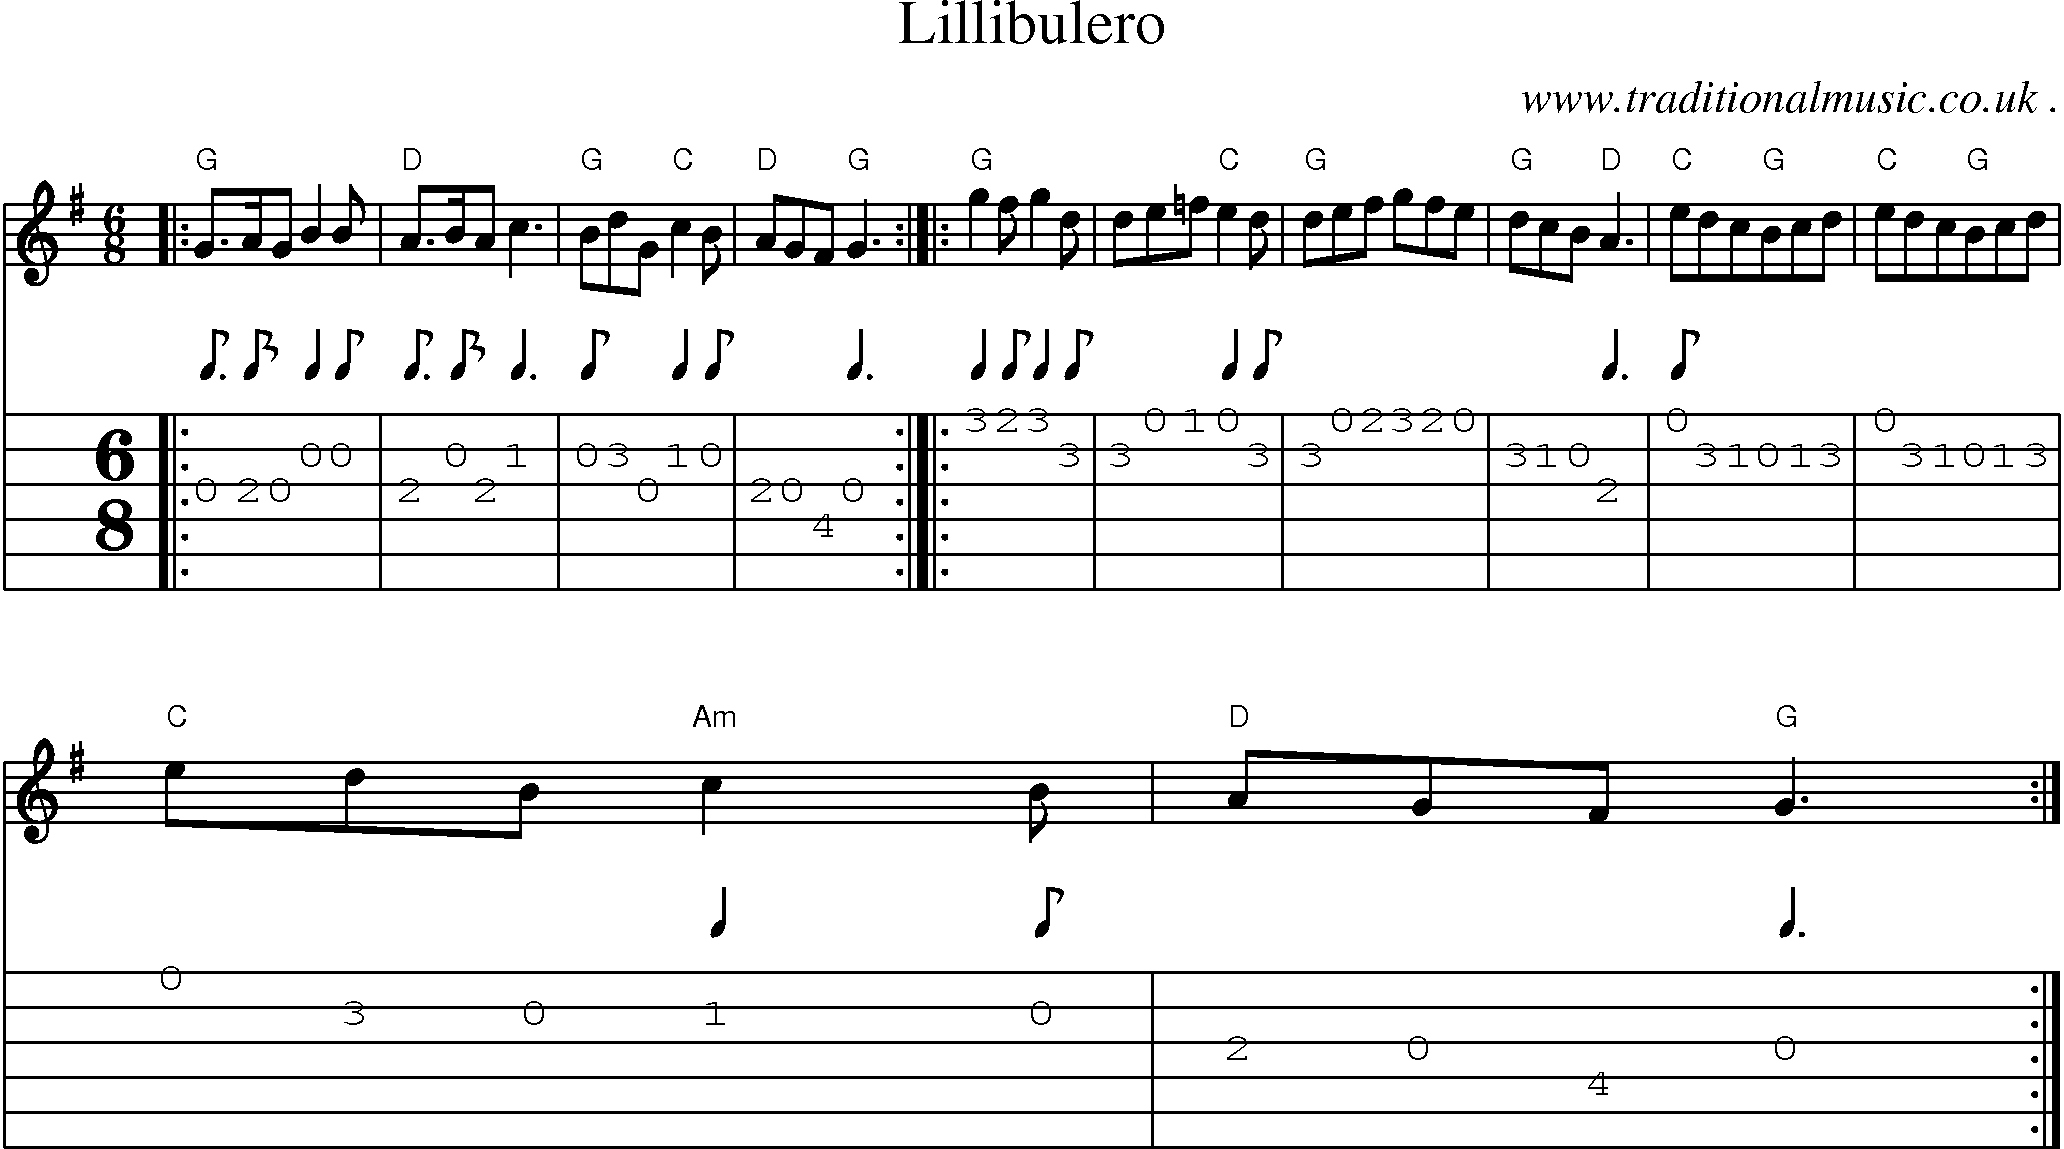 Sheet-Music and Guitar Tabs for Lillibulero